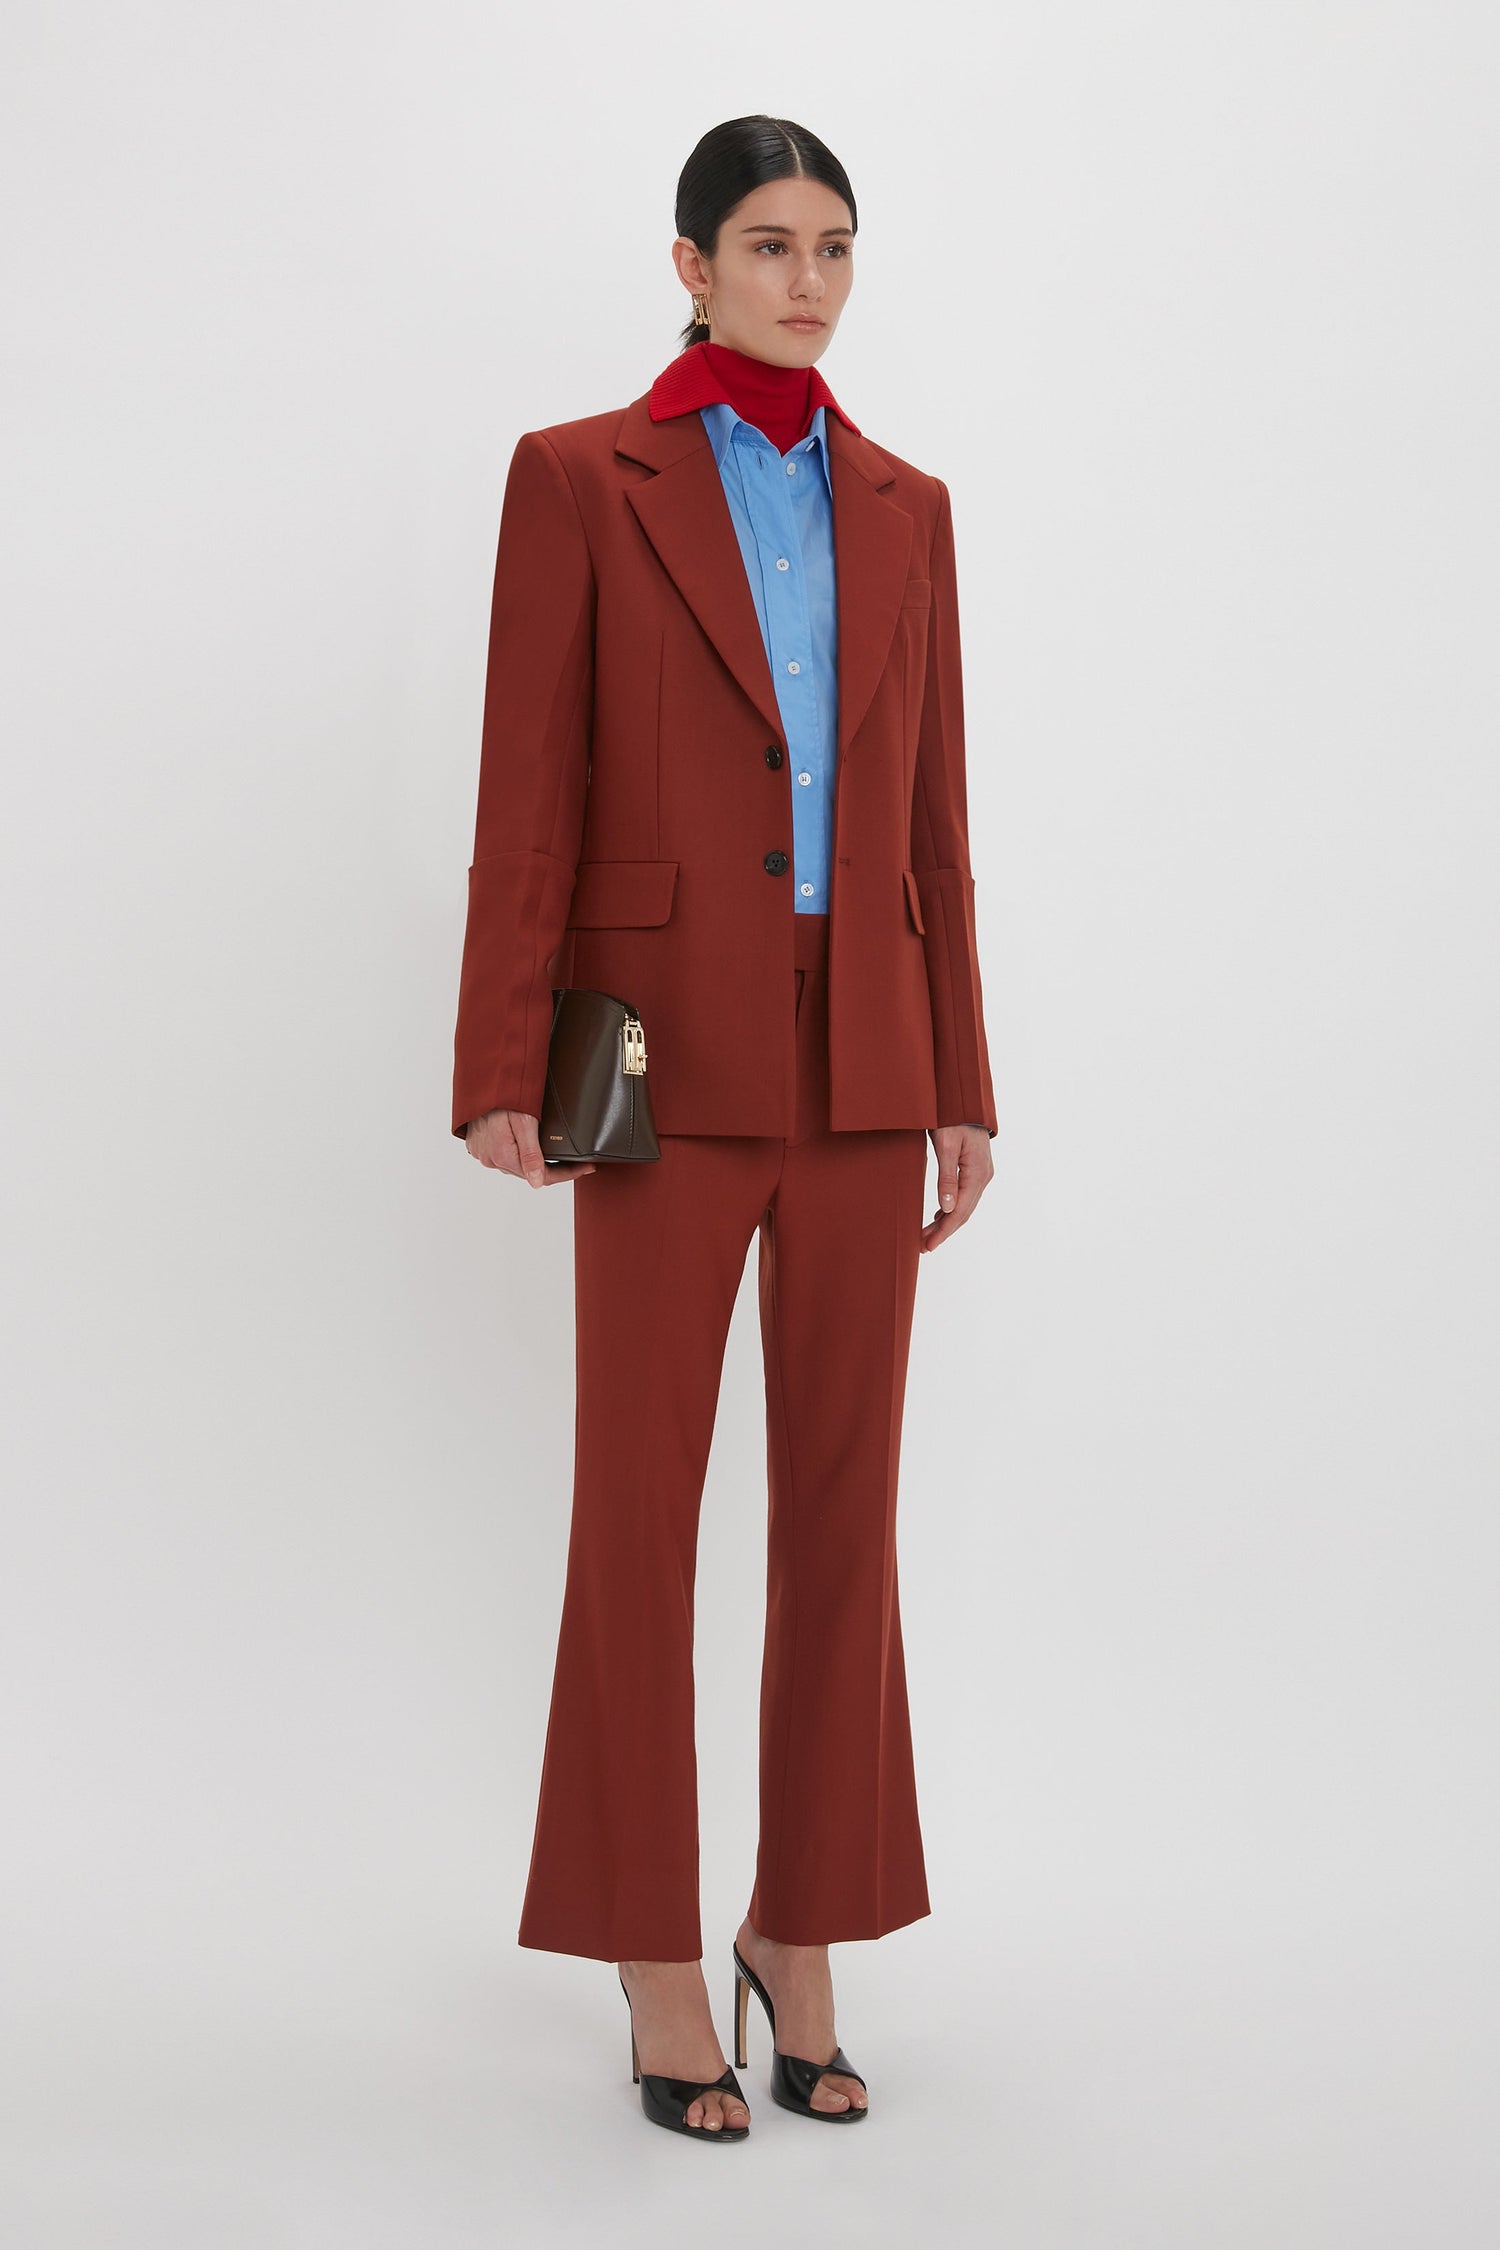 A woman in a red suit with a blue shirt and red scarf, holding a brown clutch, and wearing black heels, Victoria AW24’s signature look is complete with Victoria Beckham's Wide Cropped Flare Trouser In Russet that elevate her ensemble.